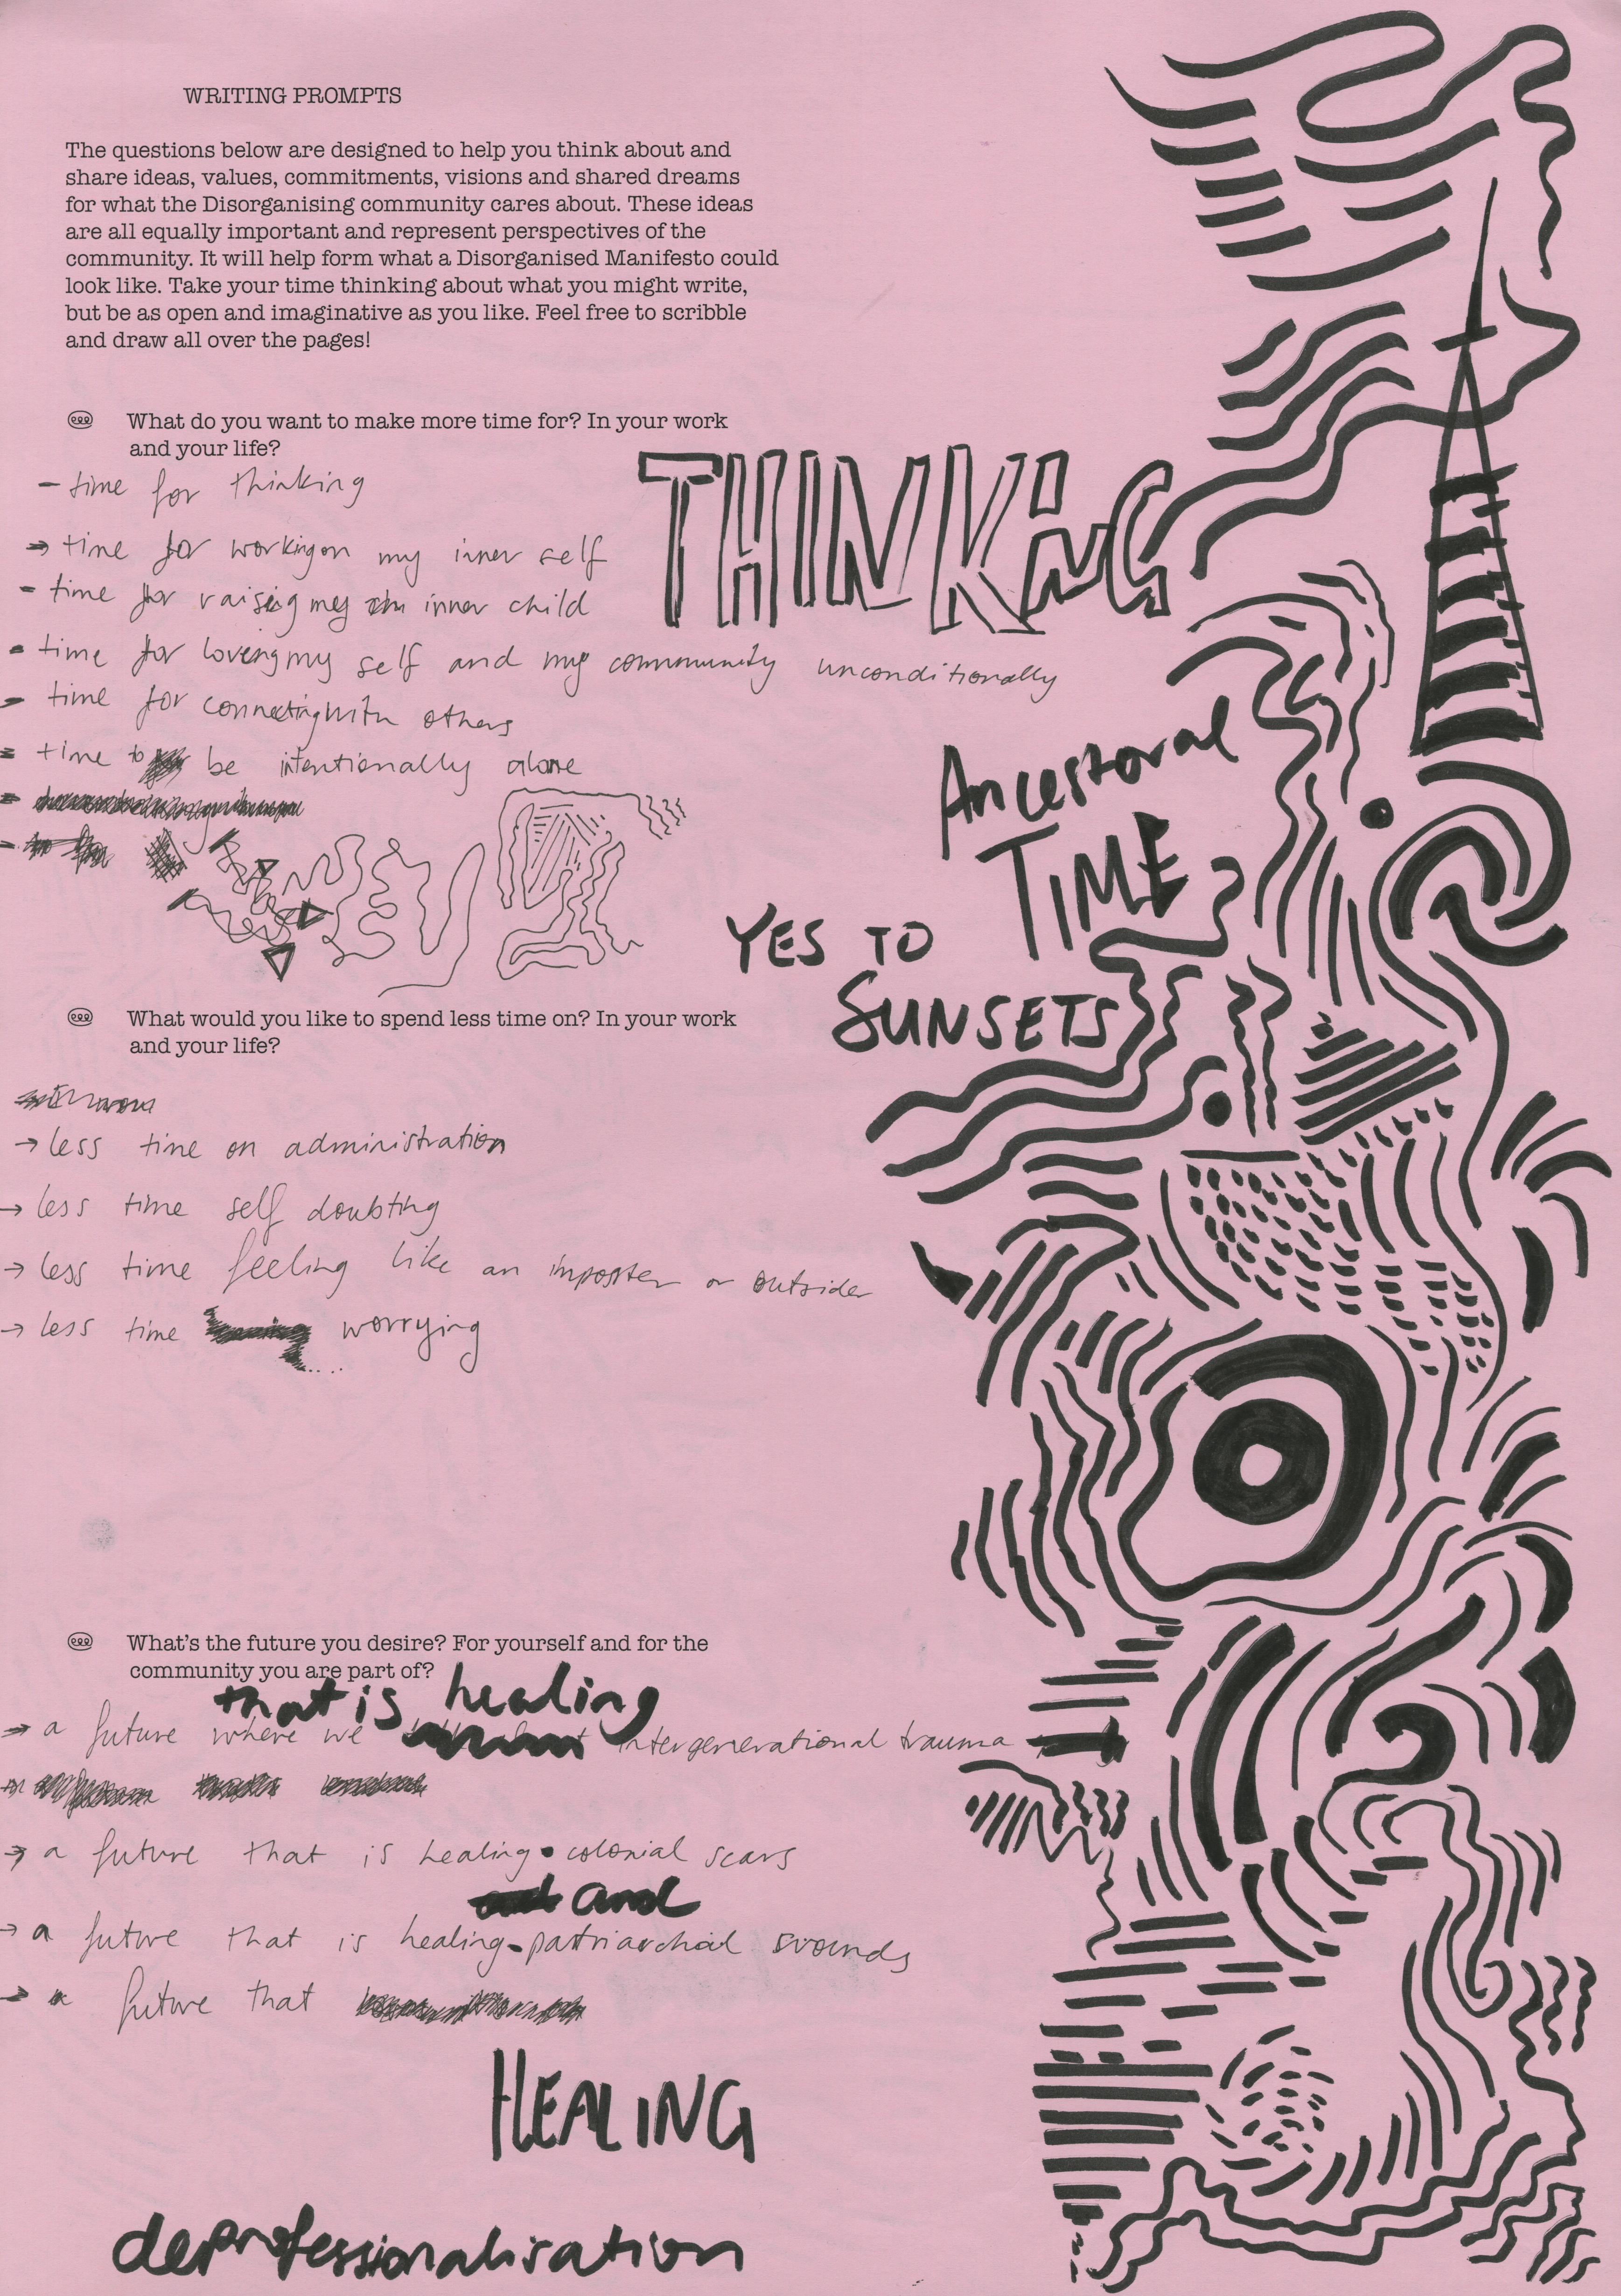 A scan of a pink poster with scribbles and handwritten answers to prompts